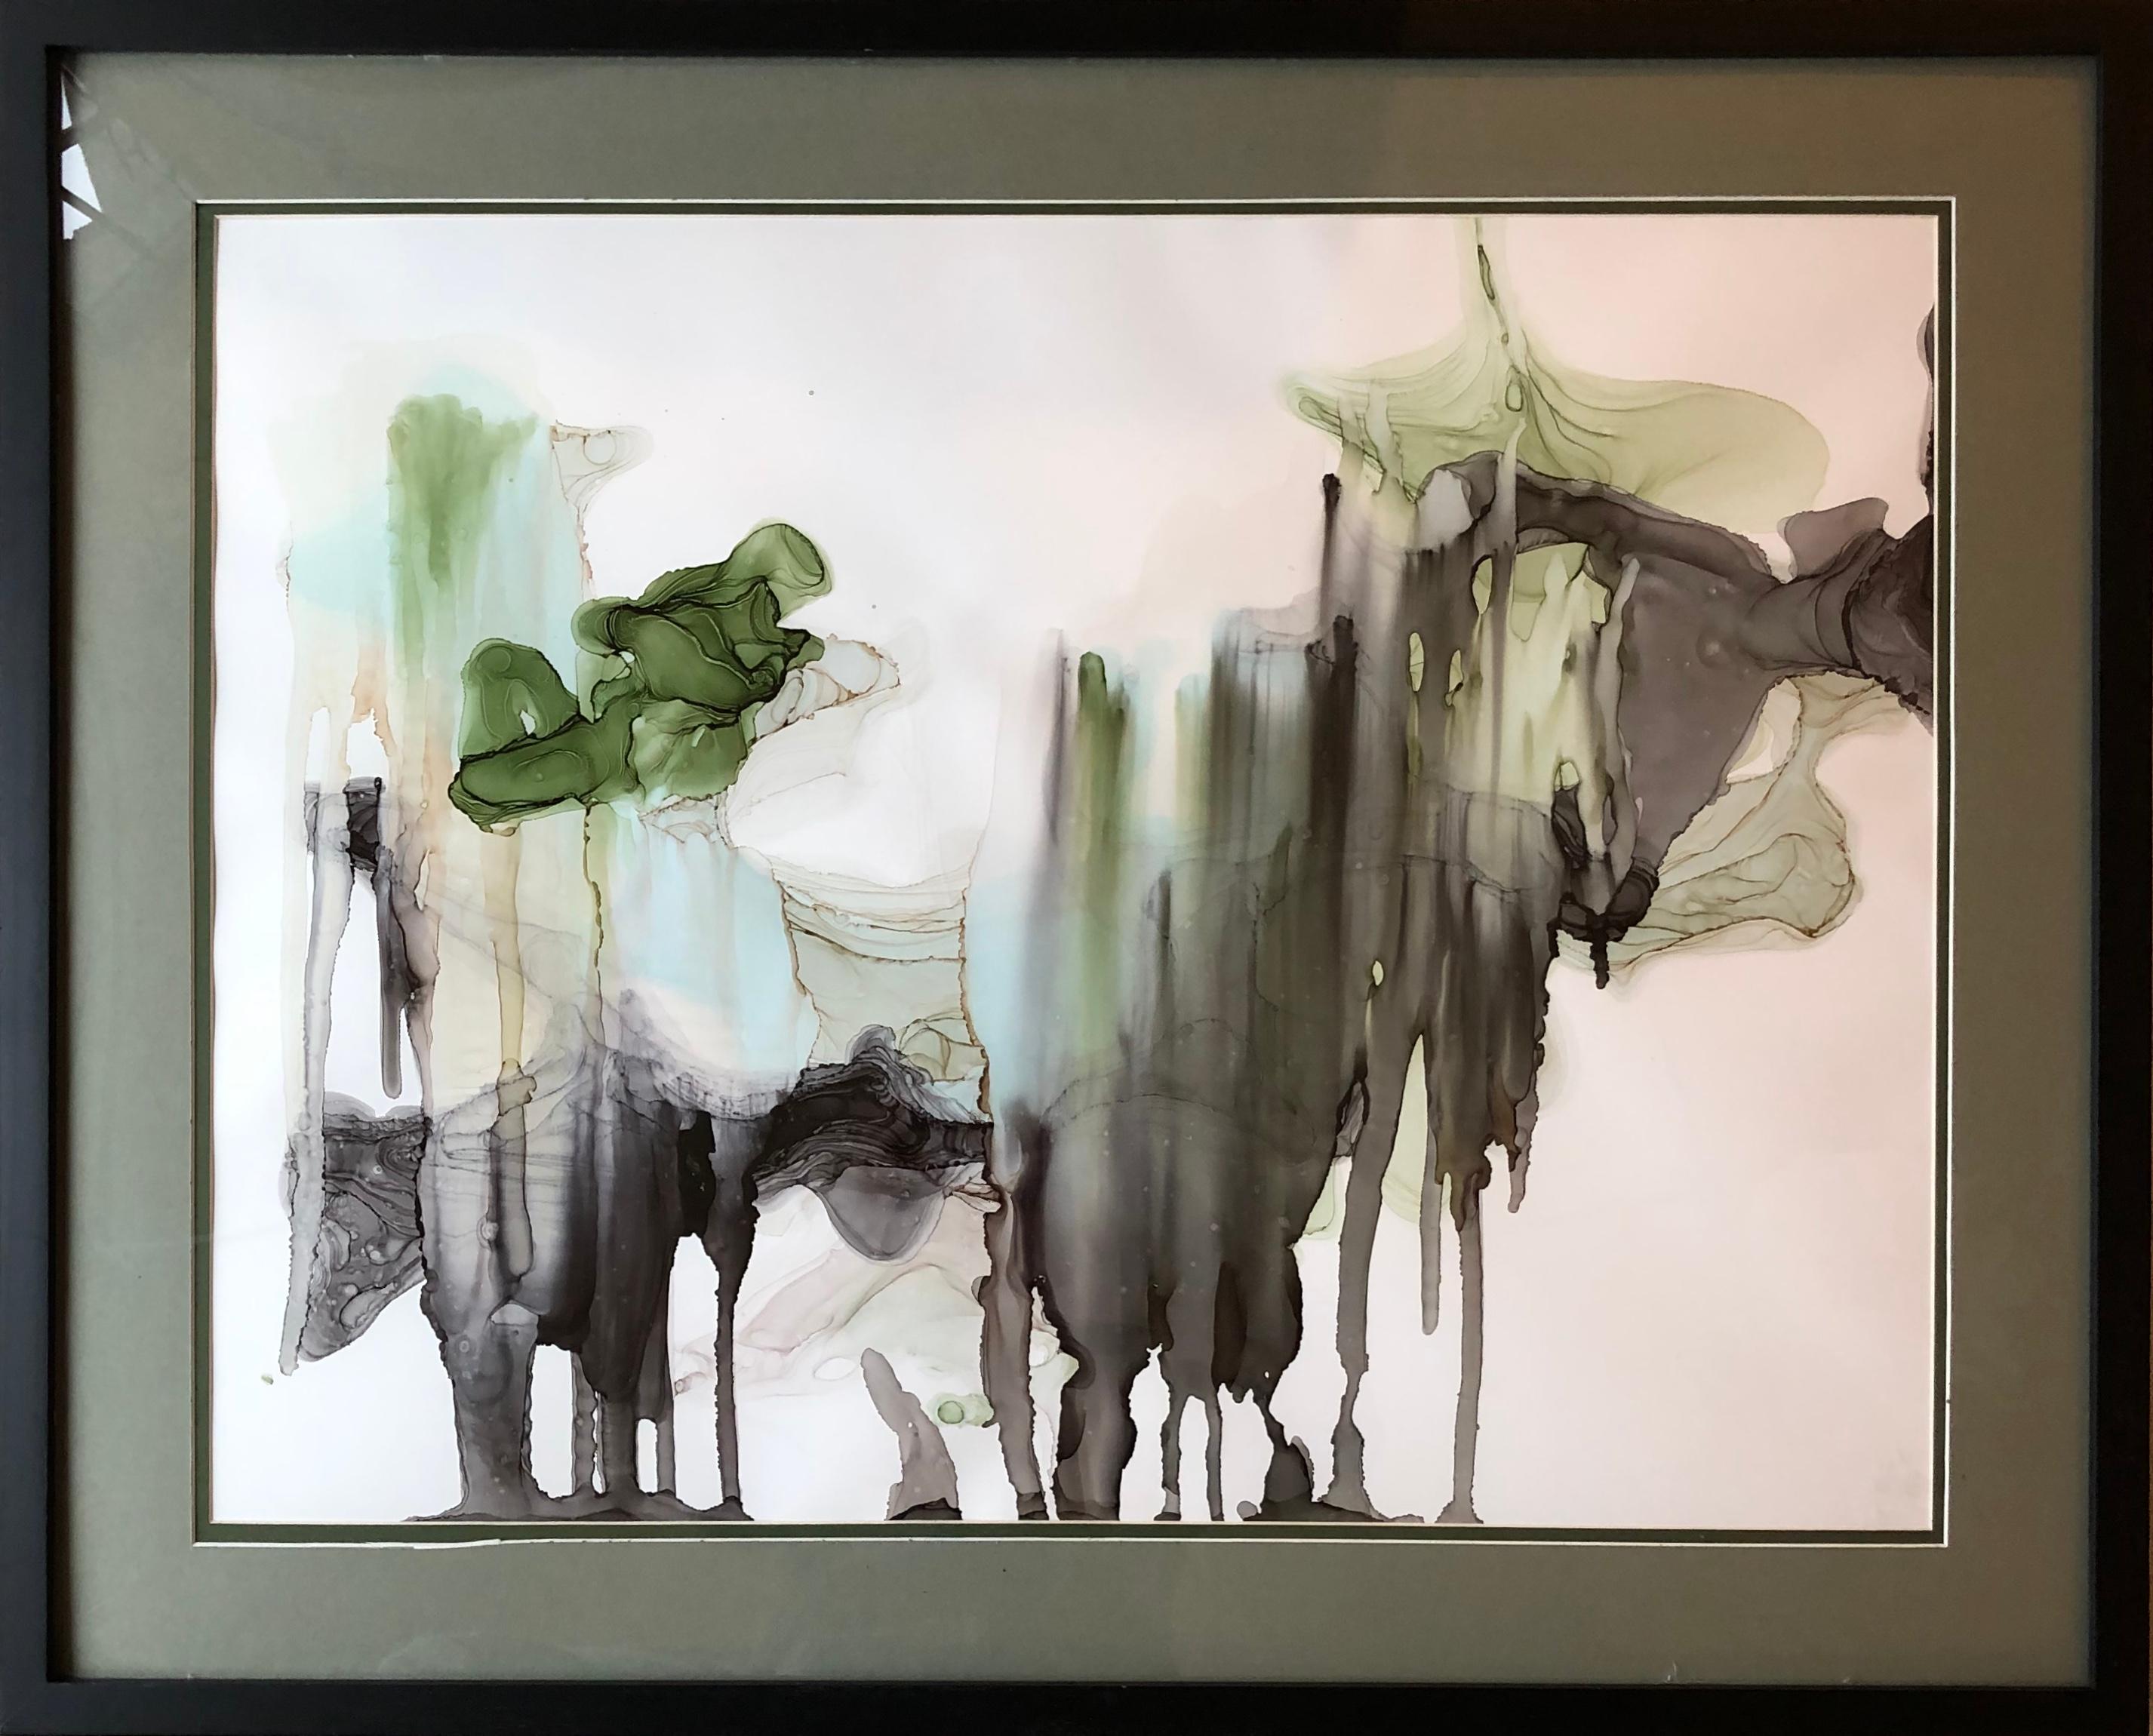 Mila Akopova Abstract Drawing - Raining in Jungles-abstract art, made in green, back, grey, olive color